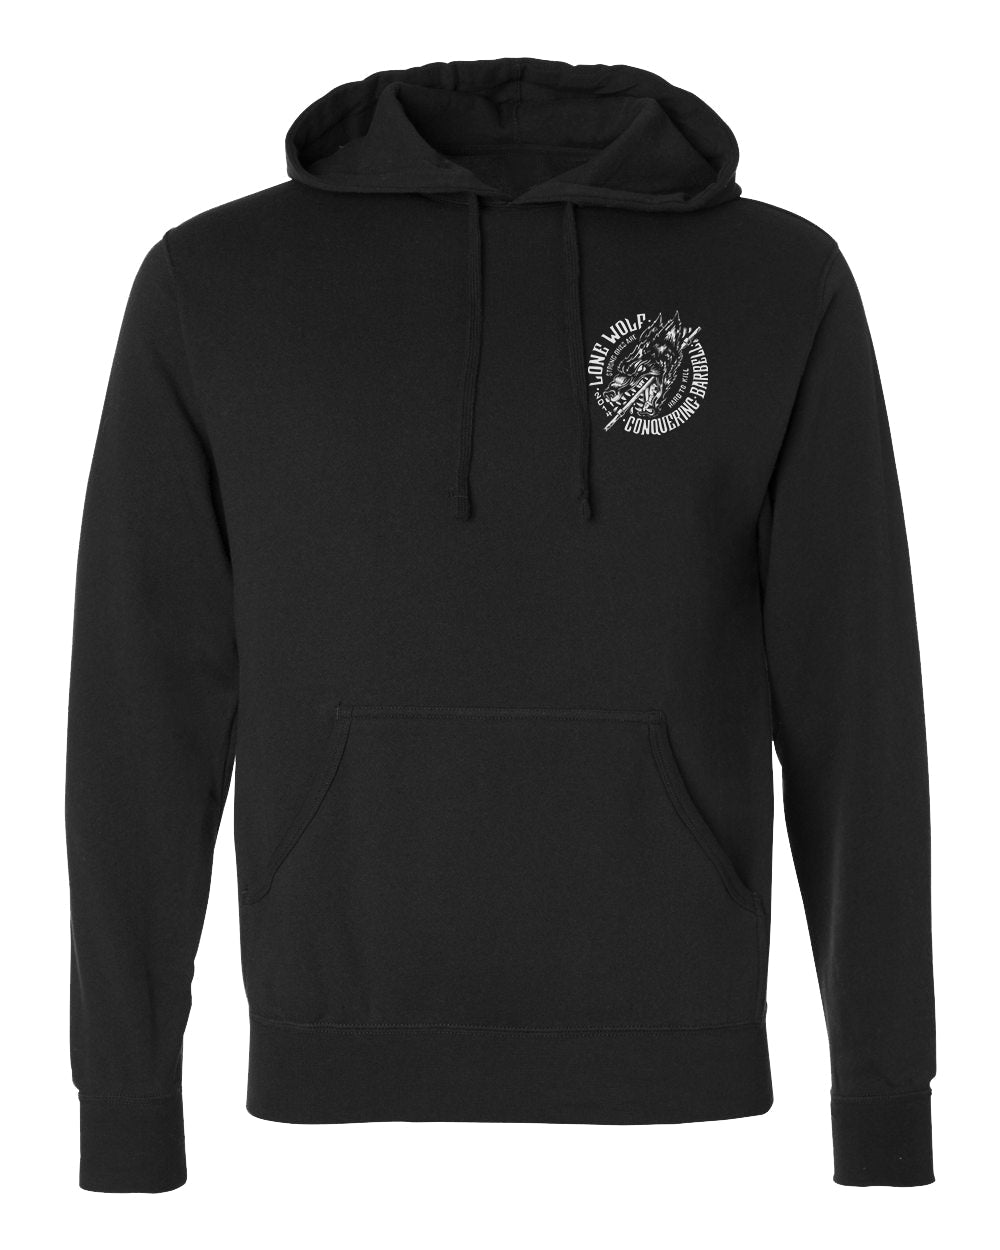 Lone Wolf - on Black Pullover Hoodie - Conquering Barbell